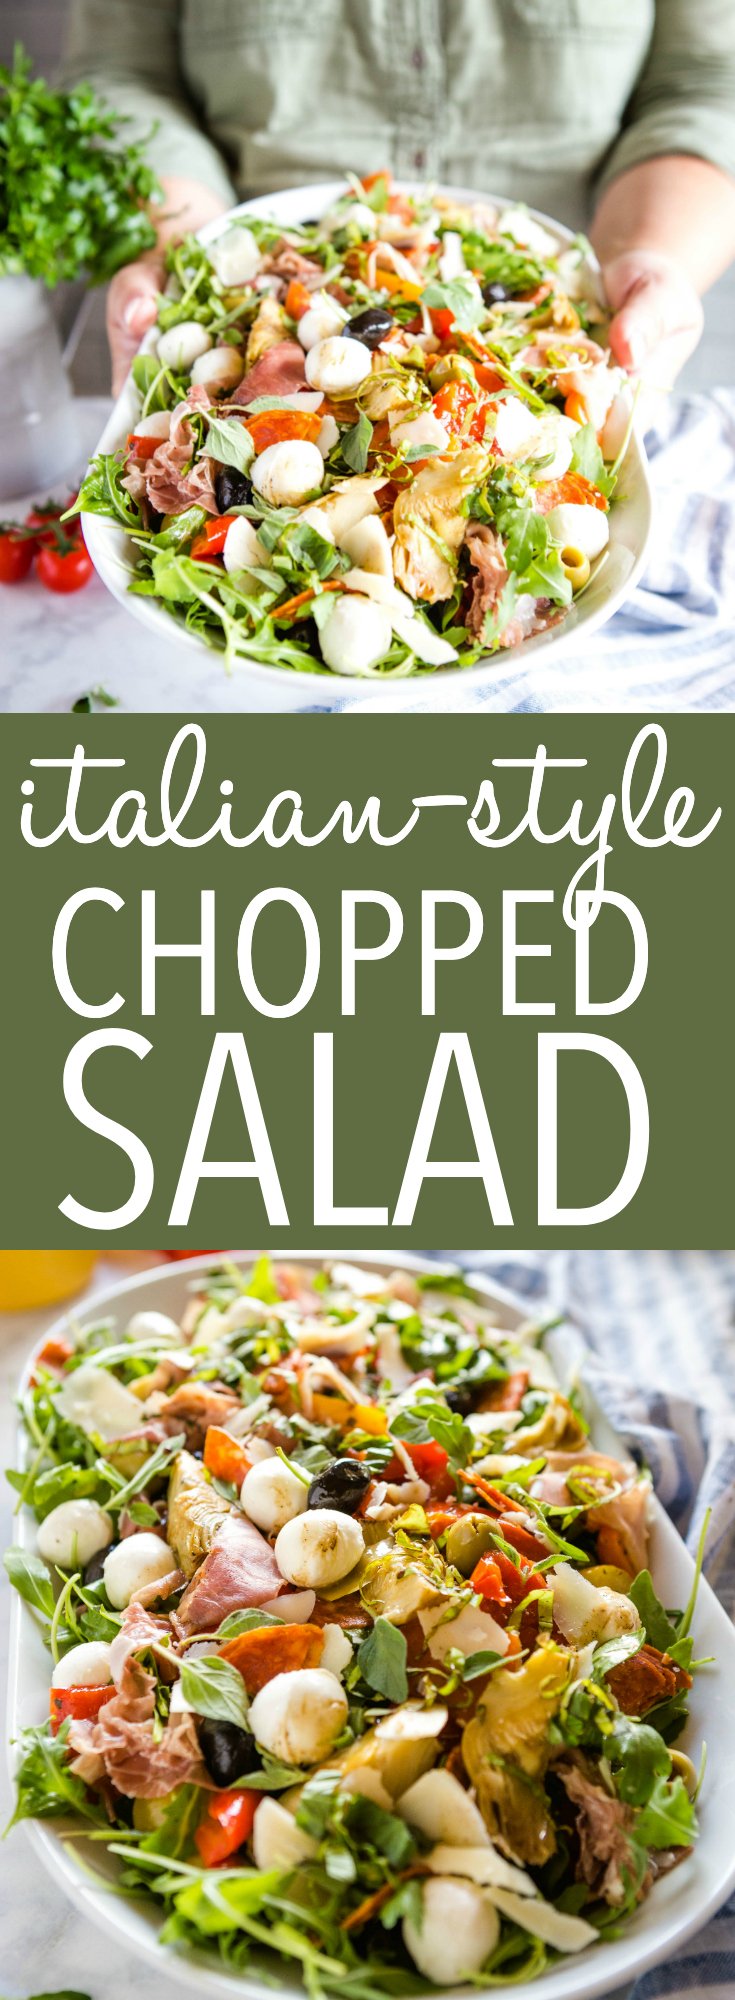 This Low Carb Italian Chopped Salad is a delicious and easy-to make light meal or side dish that's packed with savoury Italian flavours like tomatoes, olives, artichokes, roasted peppers, mozzarella, prosciutto and pepperoni! Recipe from thebusybaker.ca! #salad #italian #easytomake #lowcarb #keto #veggie #lunch #mealprep #potluck via @busybakerblog